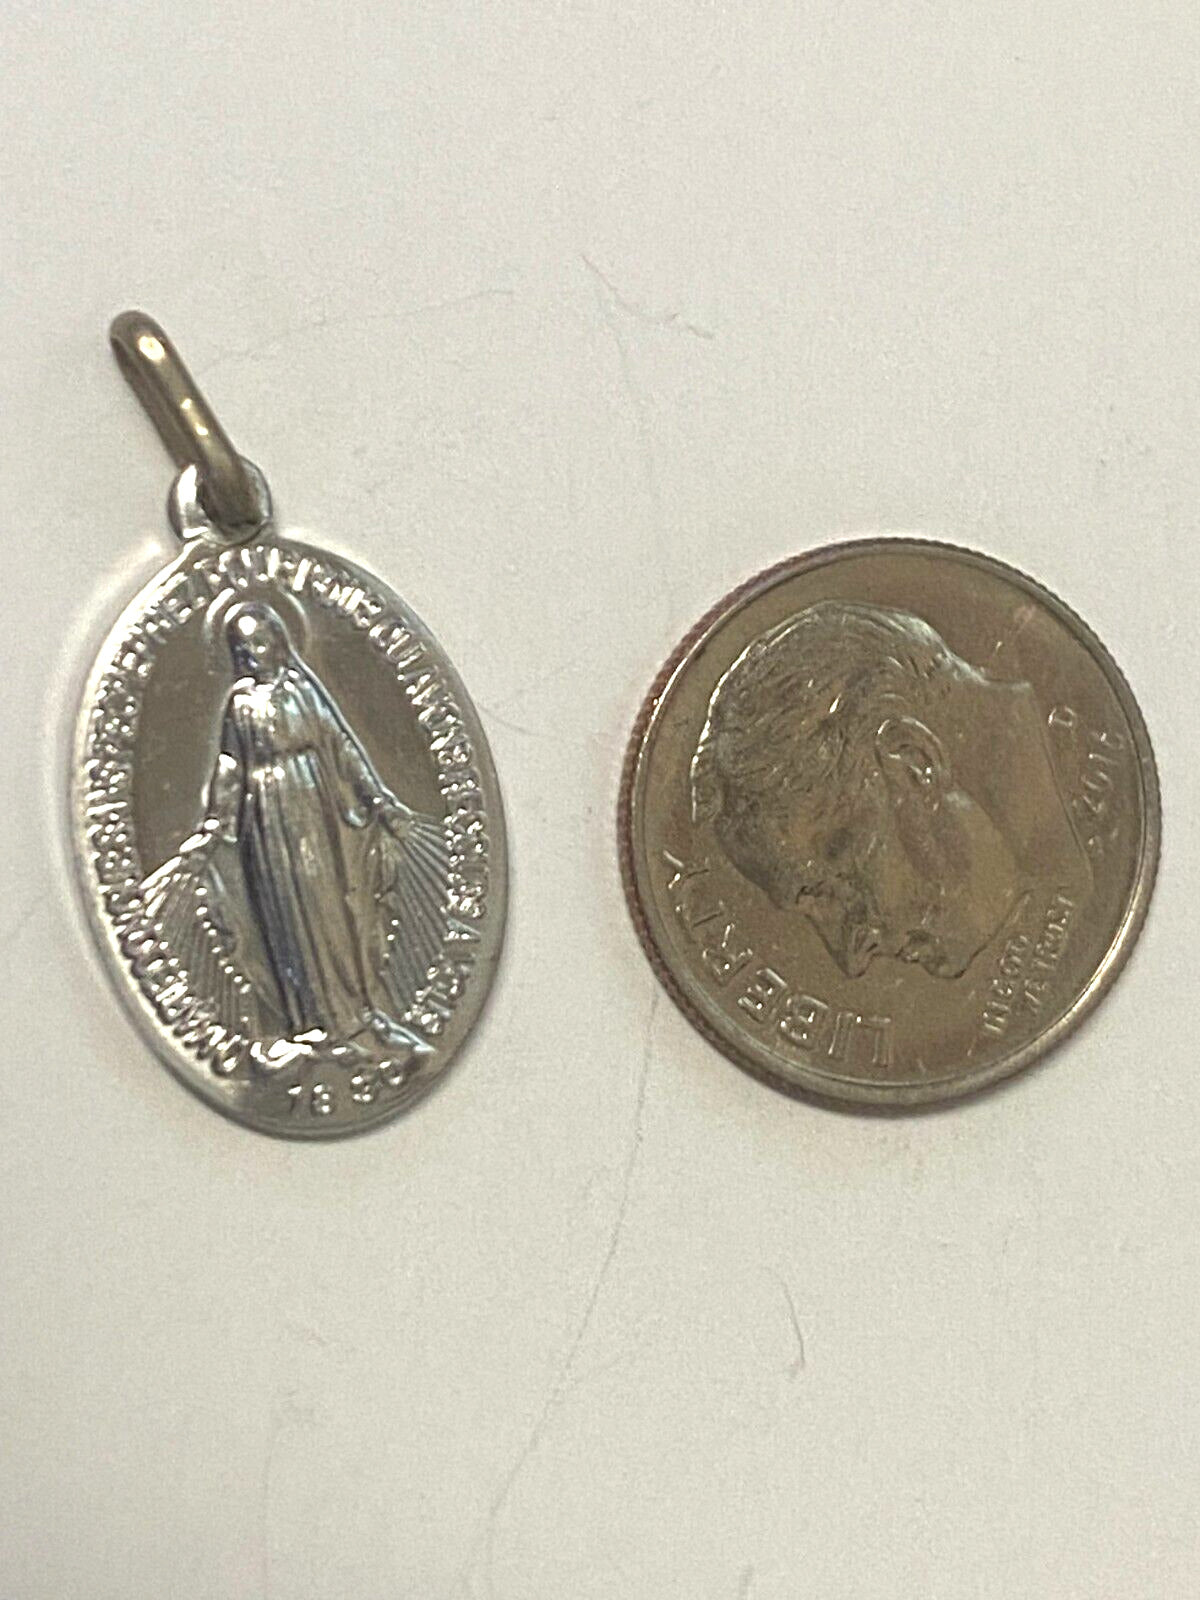 Our Lady of the Miraculous Silver tone  Image .50" Medal, New from Italy - Bob and Penny Lord